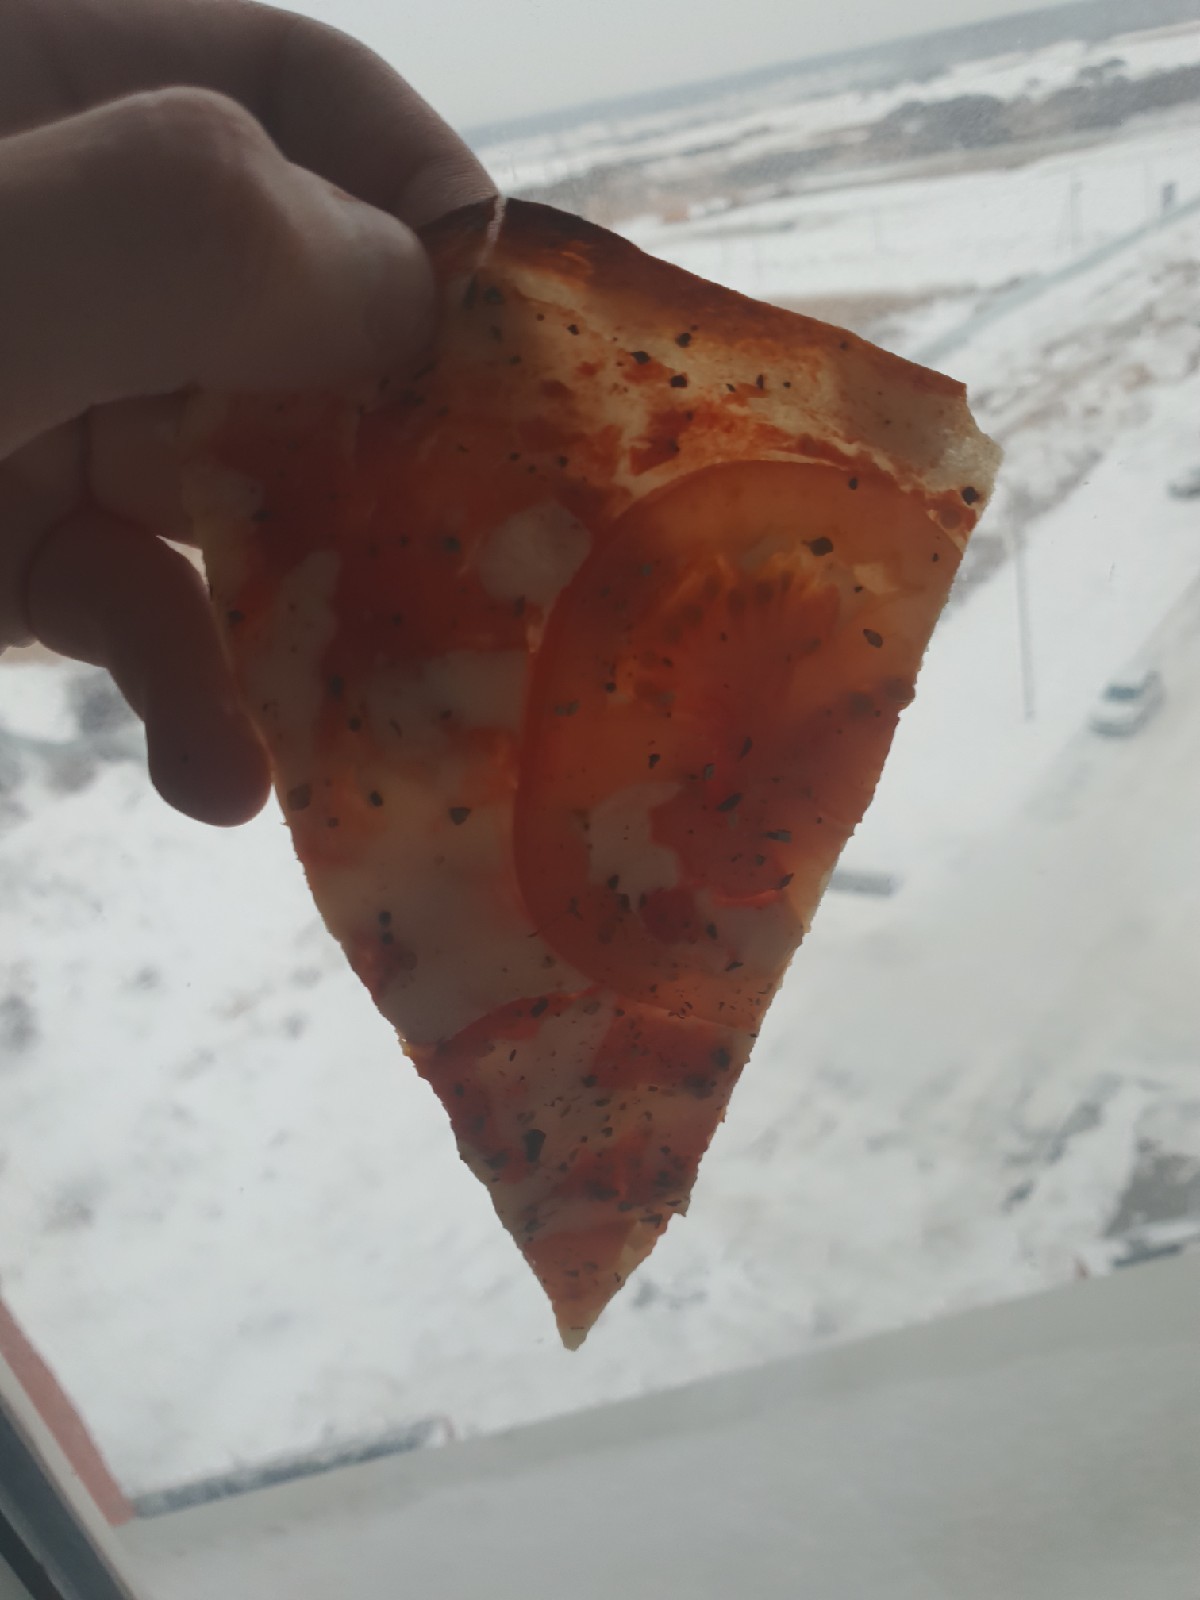 Transparent Pizza - Food delivery, Pizza, Food